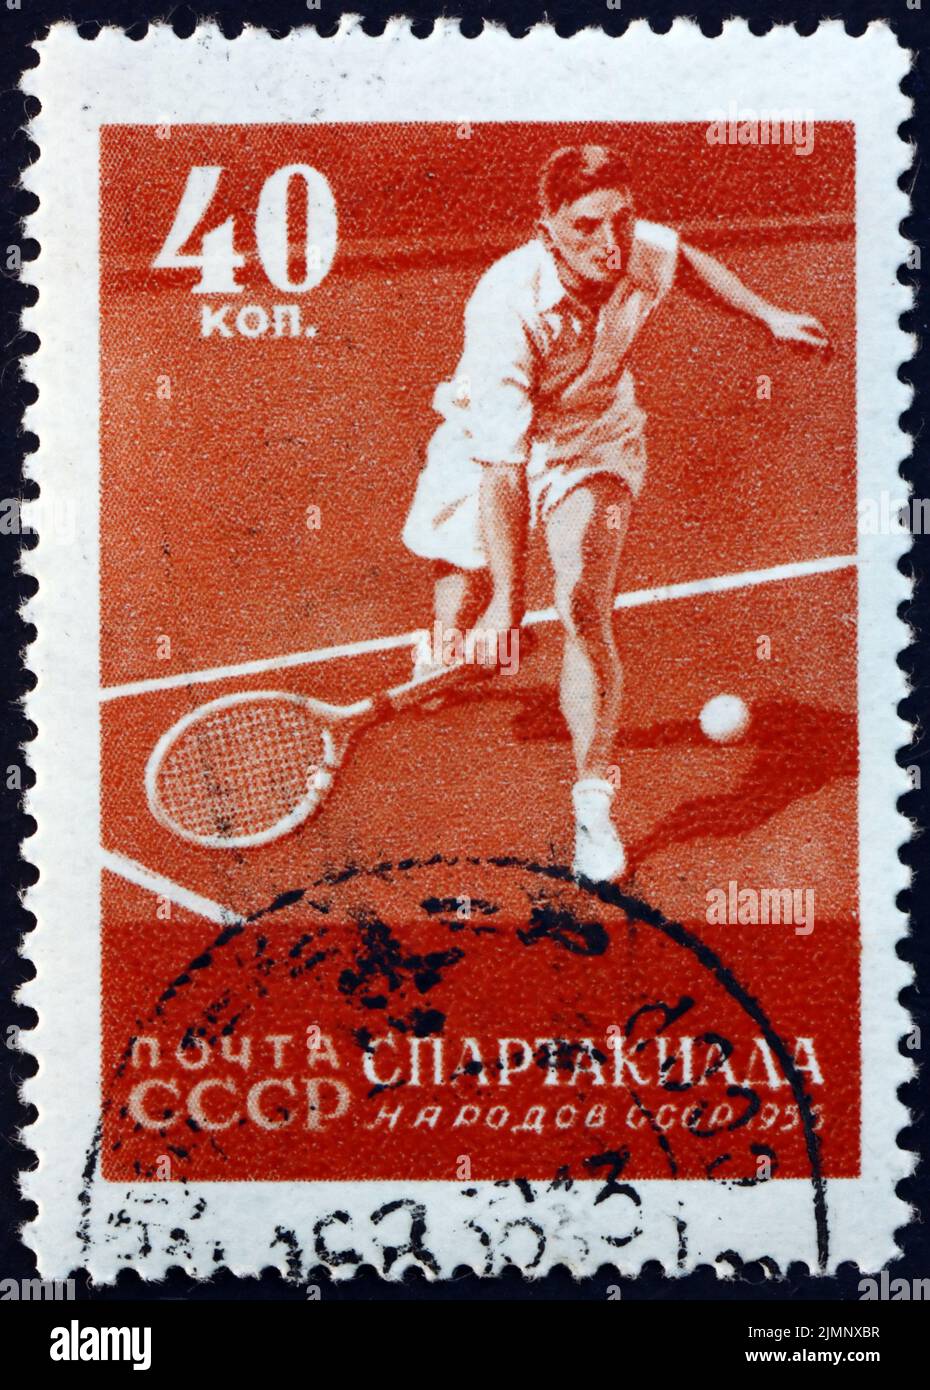 RUSSIA - CIRCA 1956: a stamp printed in Russia shows Tennis, All-Union Spartacist Games, Moscow, circa 1956 Stock Photo